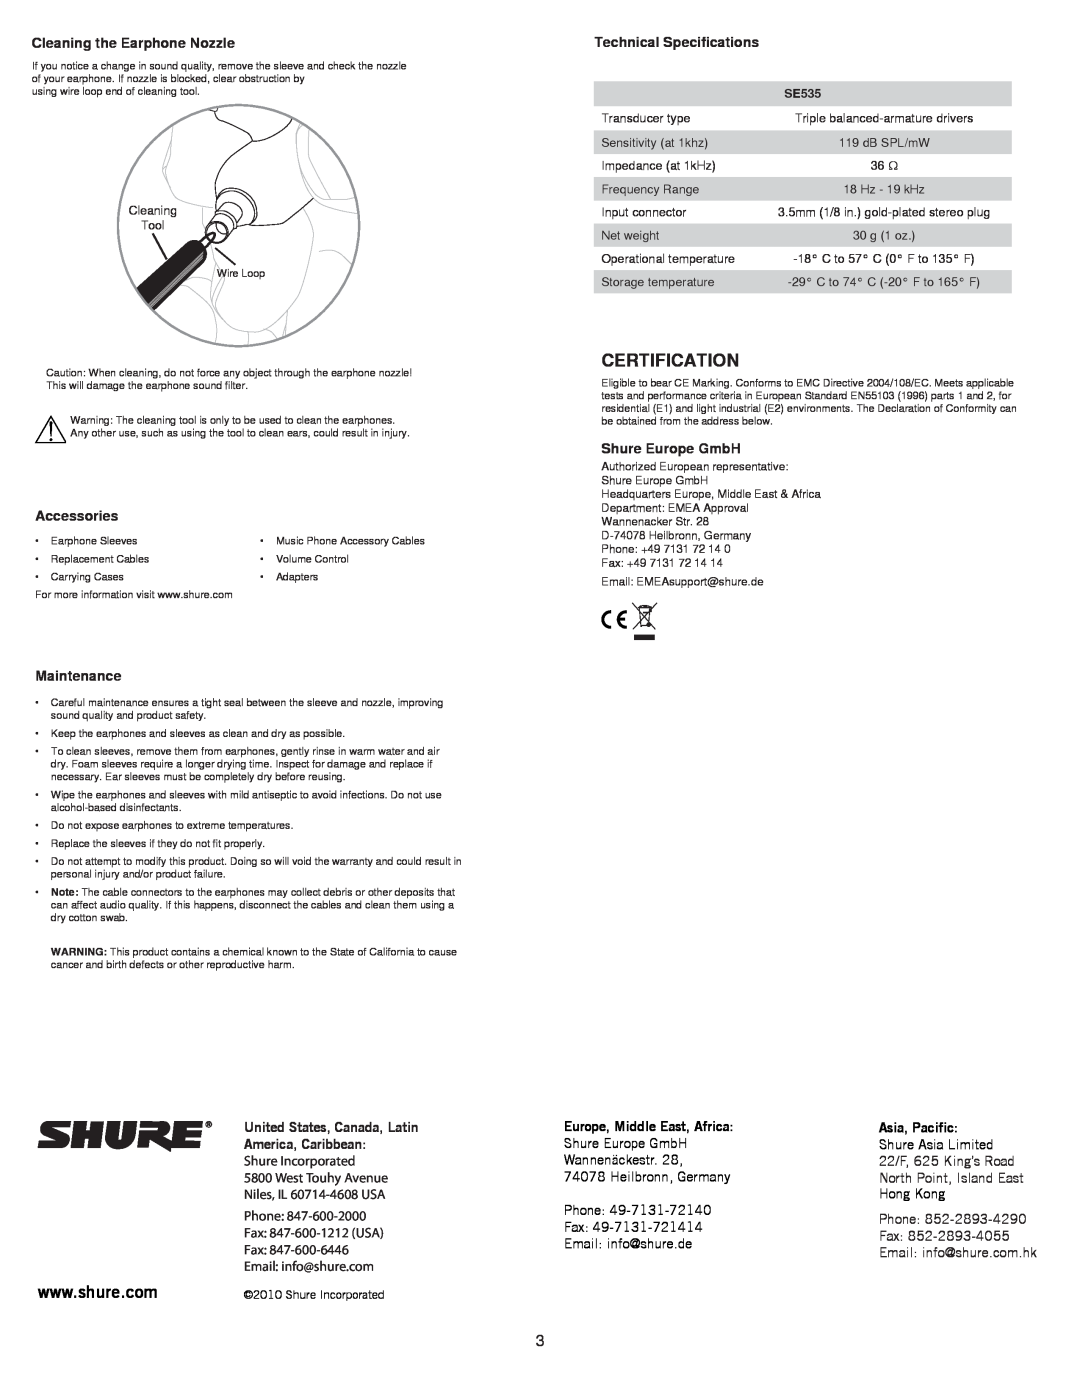 Shure MLP_SE535 manual Cleaning the Earphone Nozzle, Accessories, Maintenance, Technical Specifications, Shure Europe GmbH 